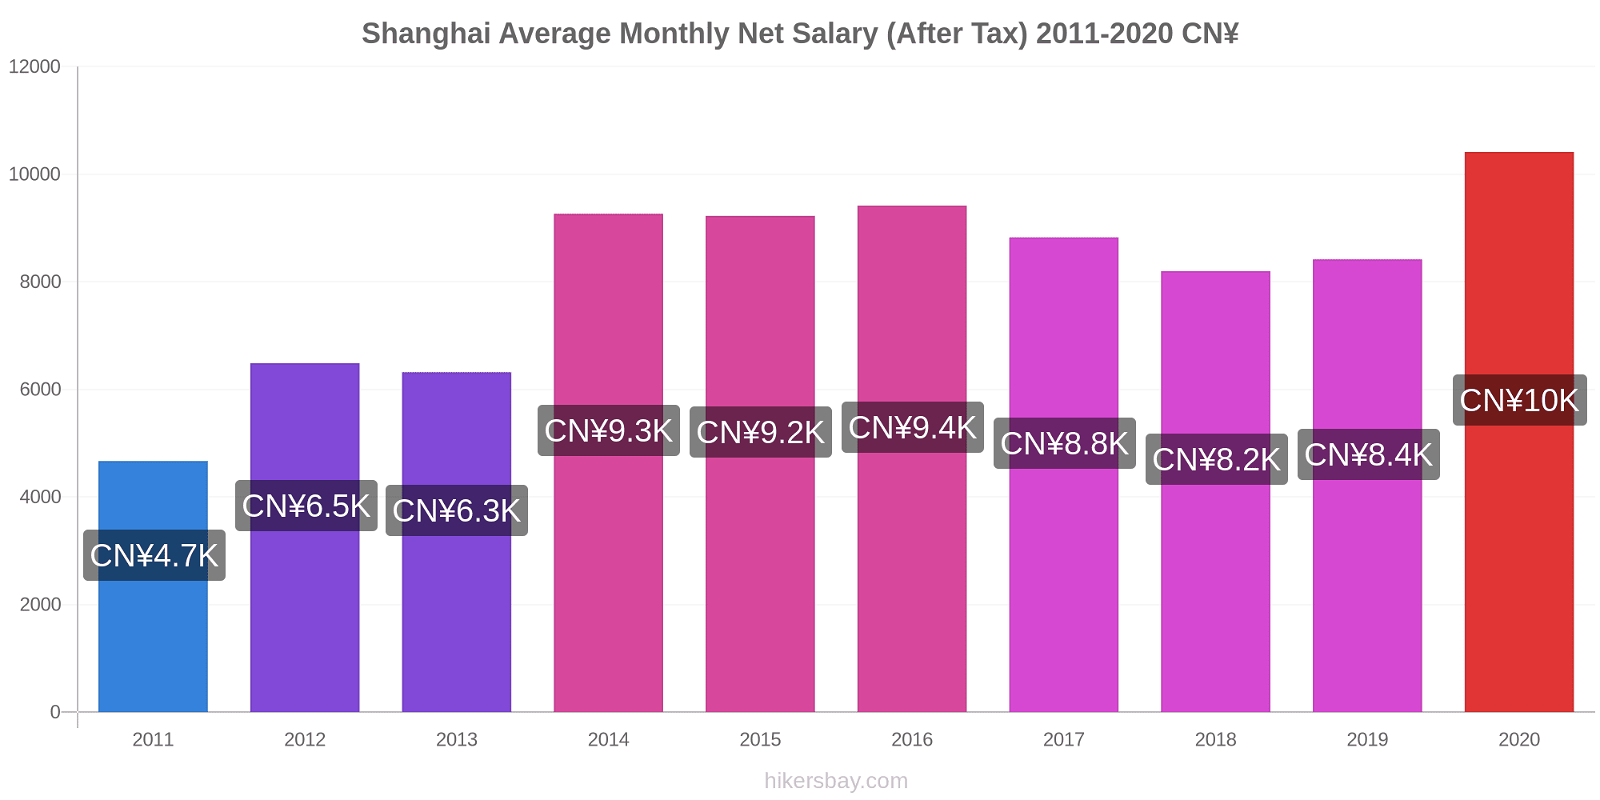 Shanghai price changes Average Monthly Net Salary (After Tax) hikersbay.com